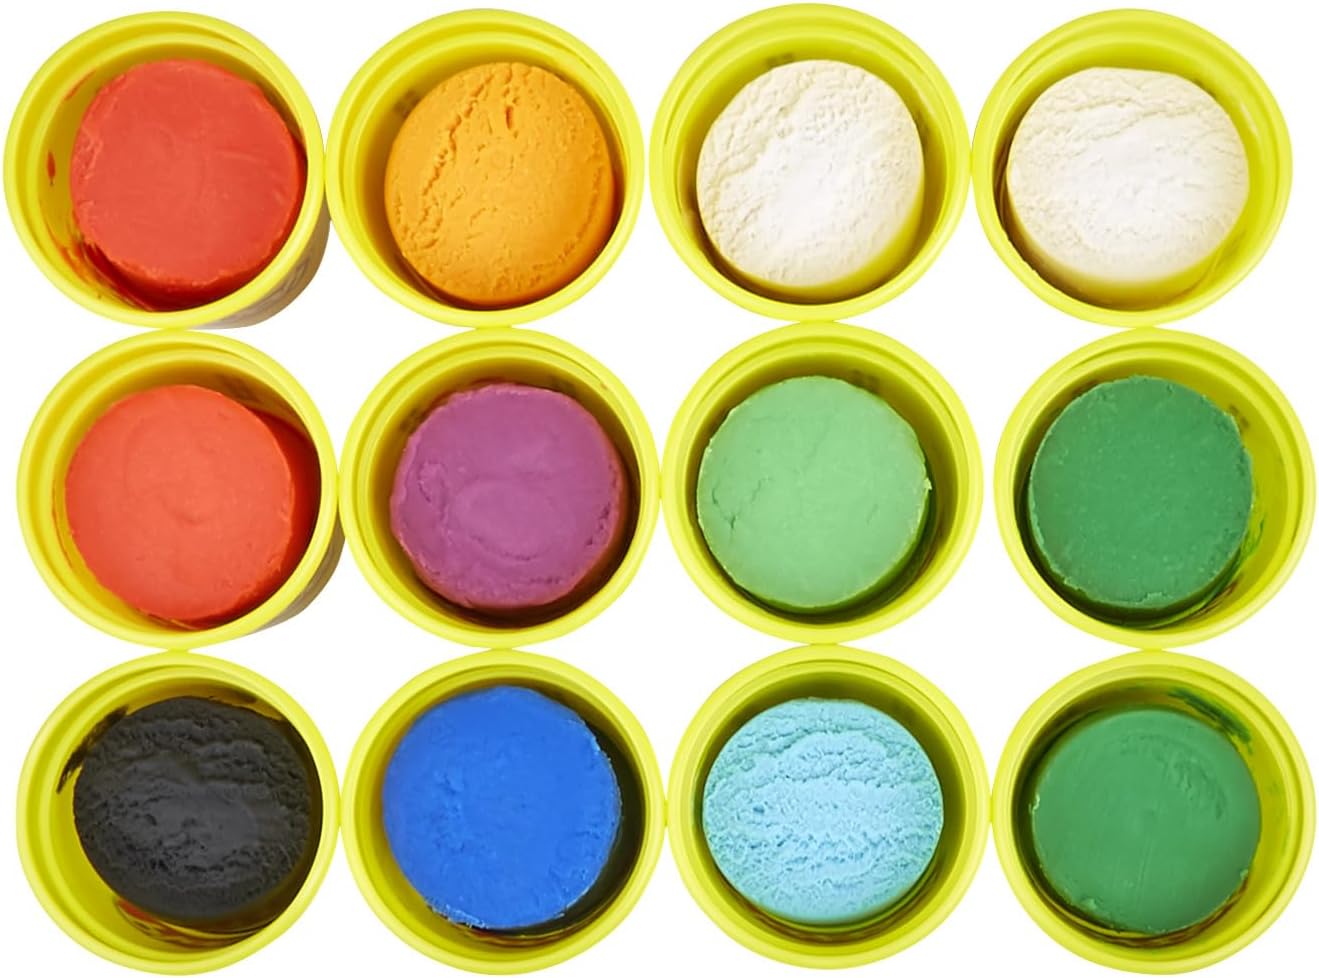 Play-Doh Bulk Winter Colors 12-Pack of Non-Toxic Modeling Compound, 4-Ounce Cans